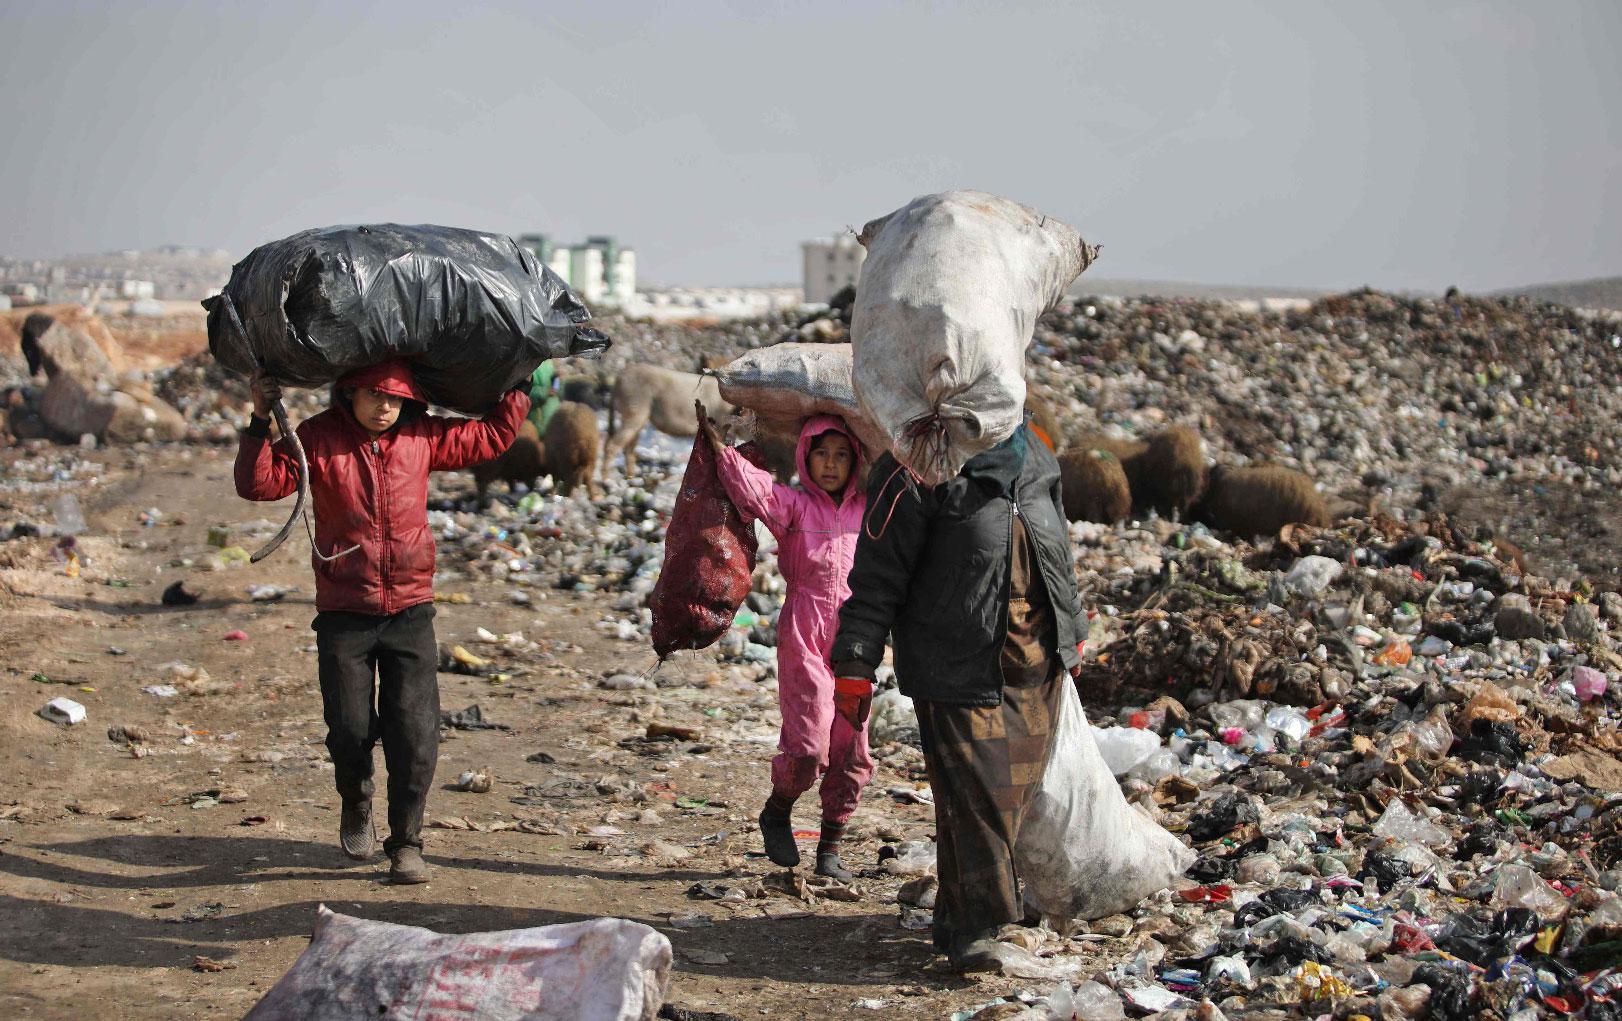 A displaced Syrian woman and children carry over their heads bags of collected trash at a landfill outside a camp in Kafr Lusin near the border with Turkey in Idlib province in northwestern Syria, on January 29, 2019.